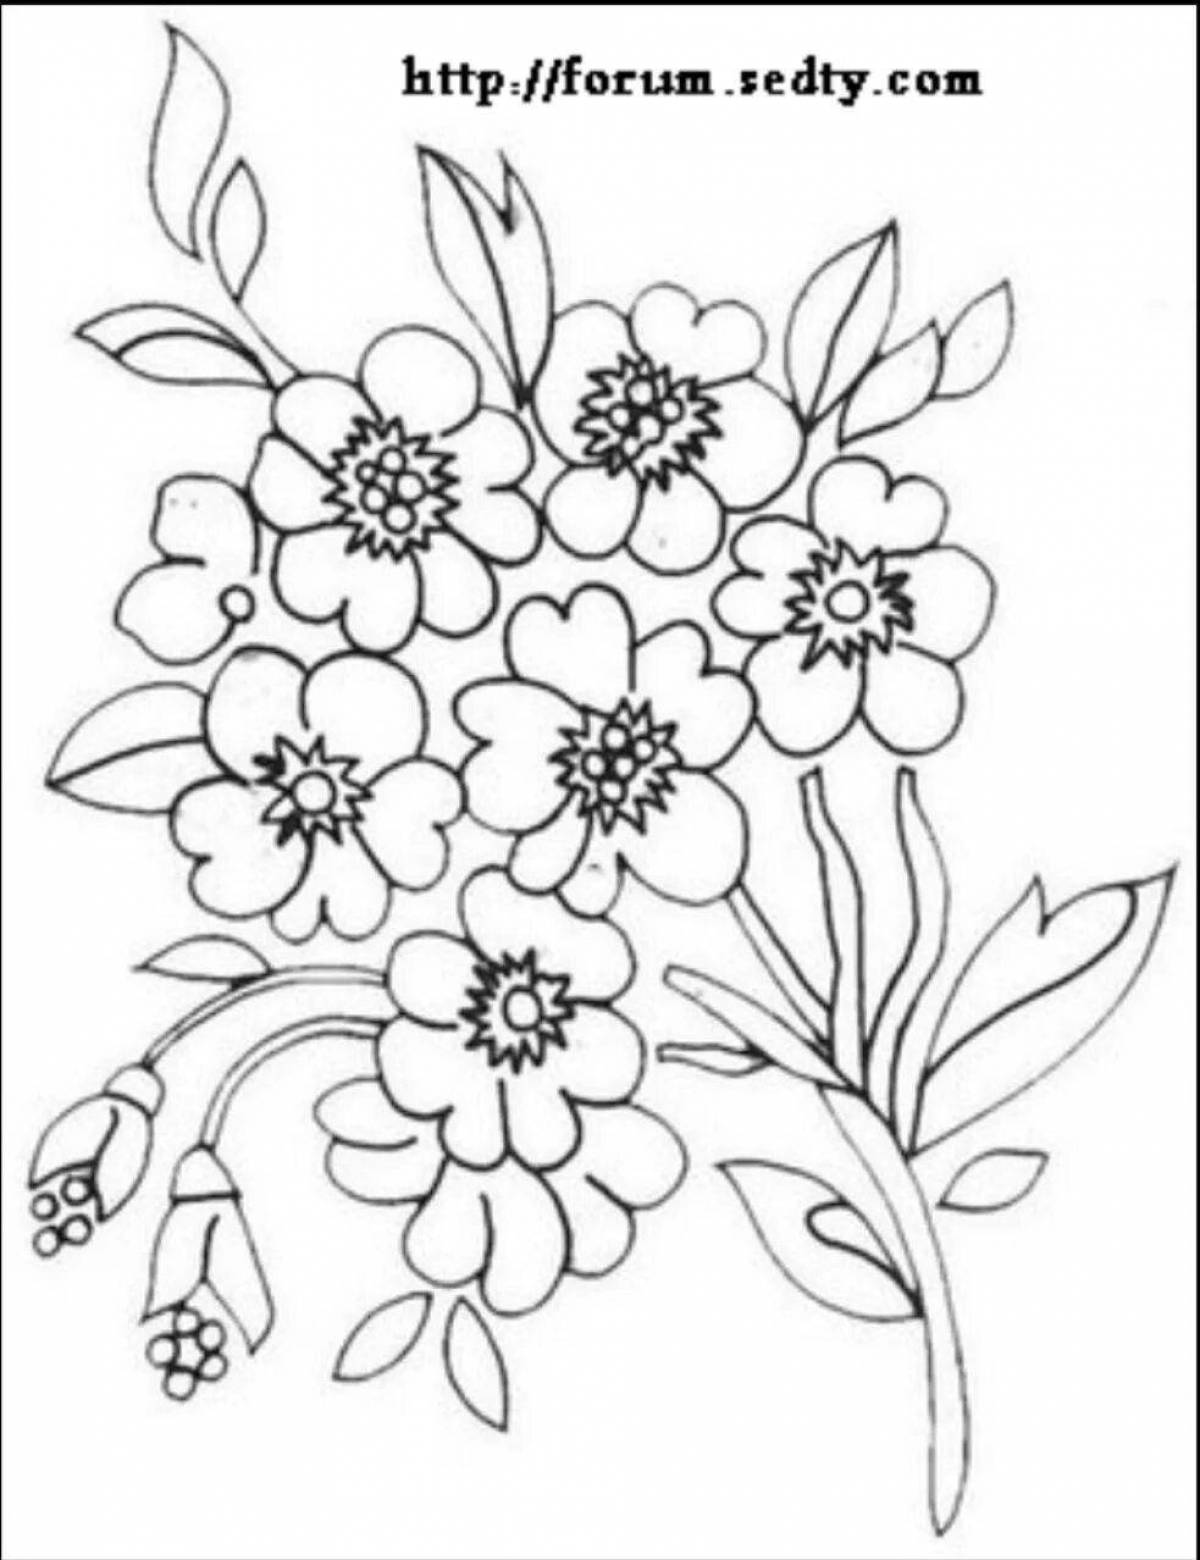 Fabulous forget-me-nots coloring book